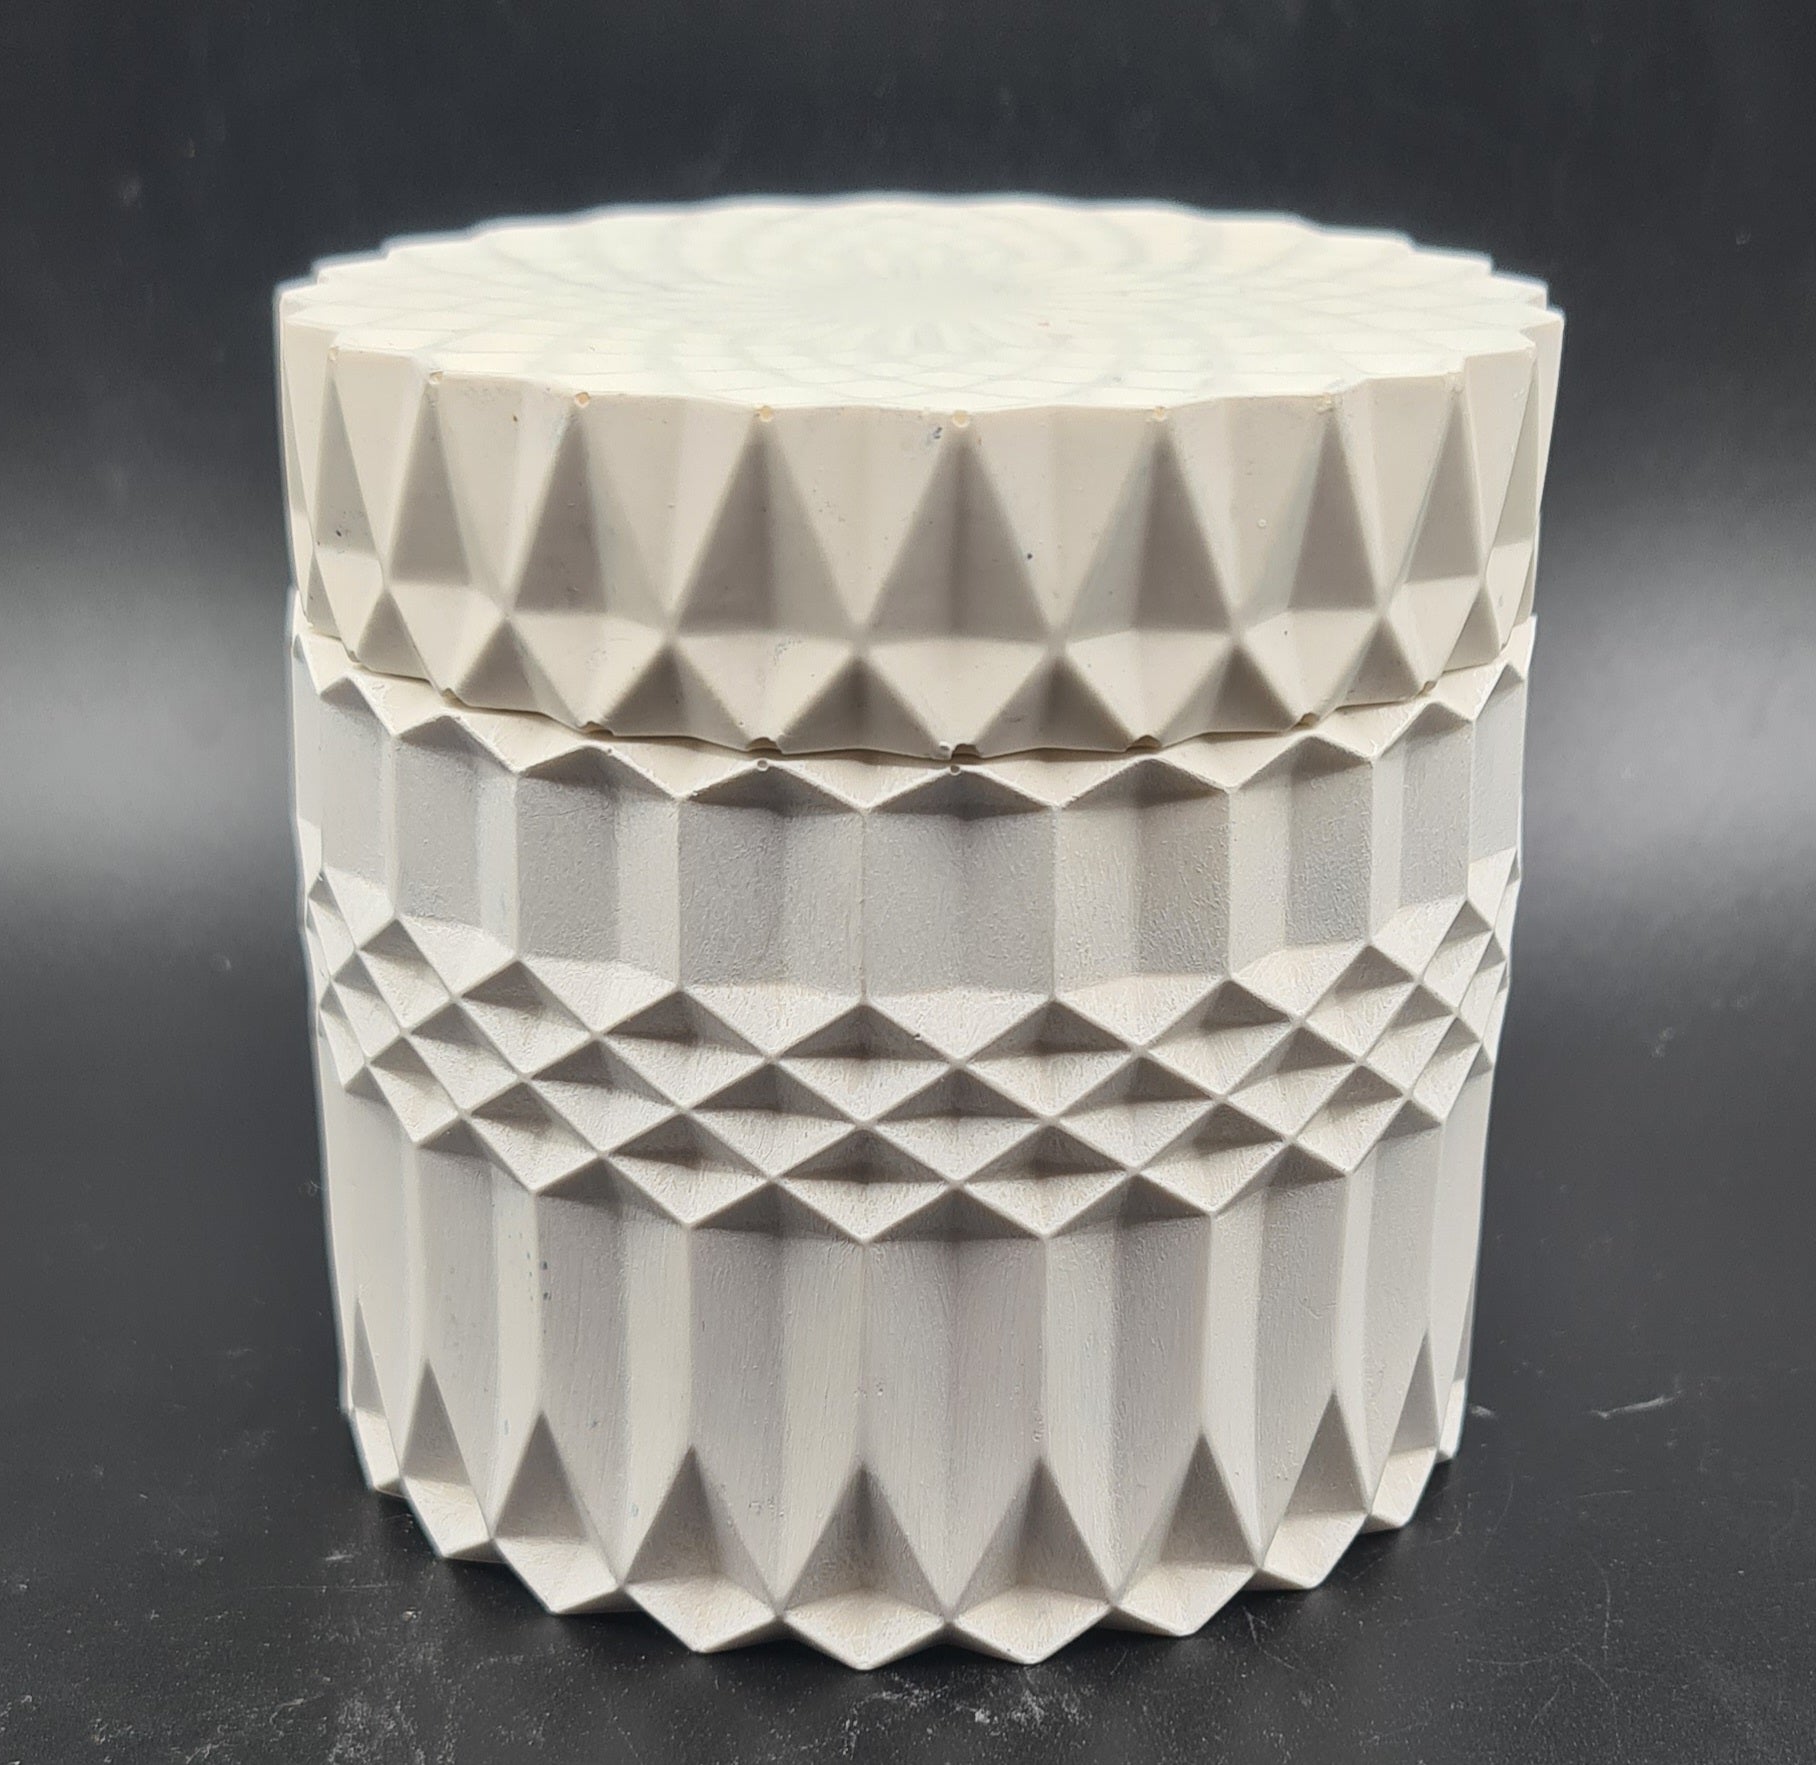 Artisanal craftsmanship meets geometry in this unique candle pot.